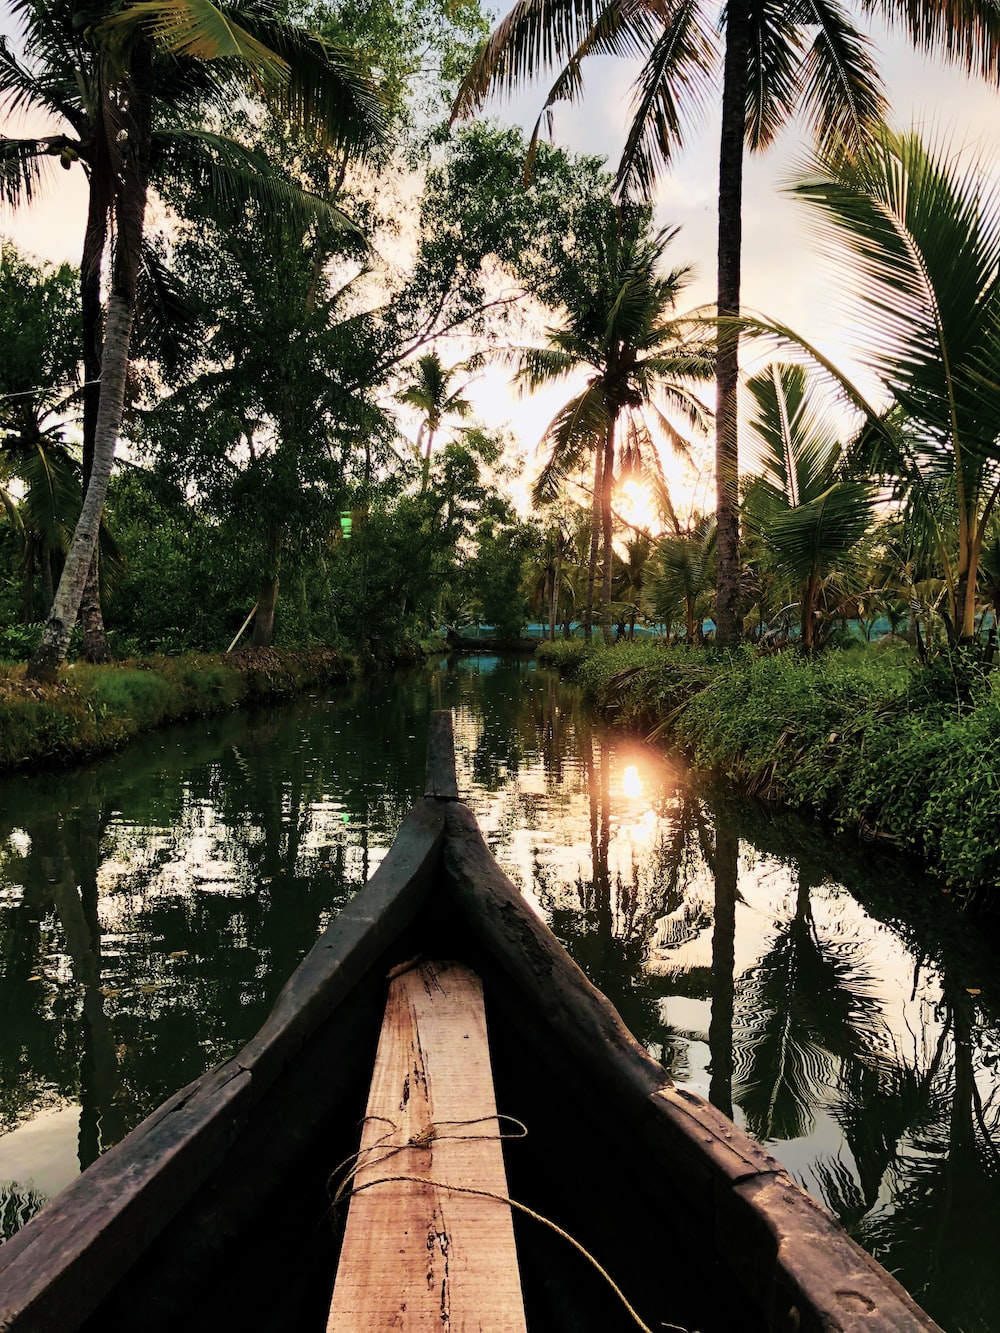 Kerala Backwaters Picture. Download Free Image